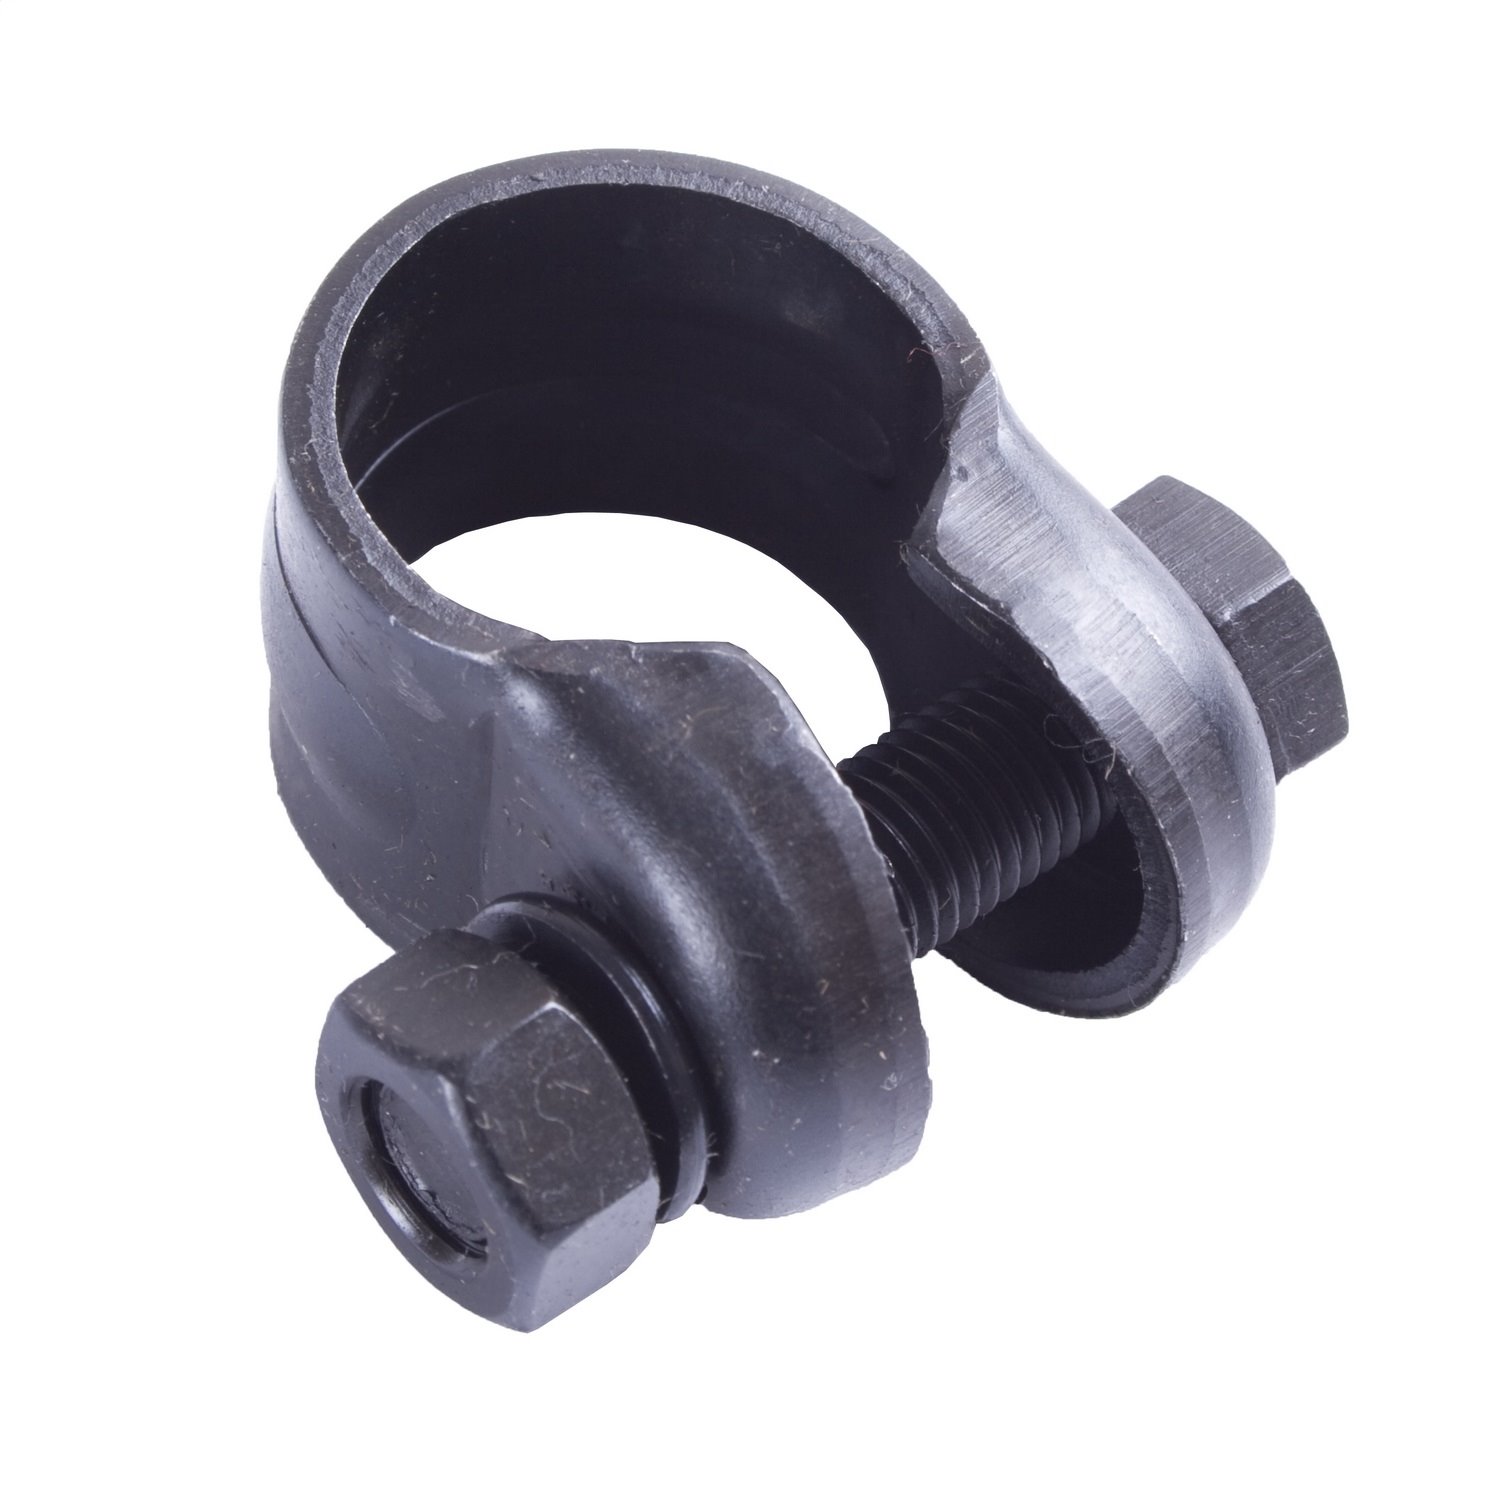 Replacement tie rod clamp from Omix-ADA, Fits 46-86 Willys and Jeep CJs.